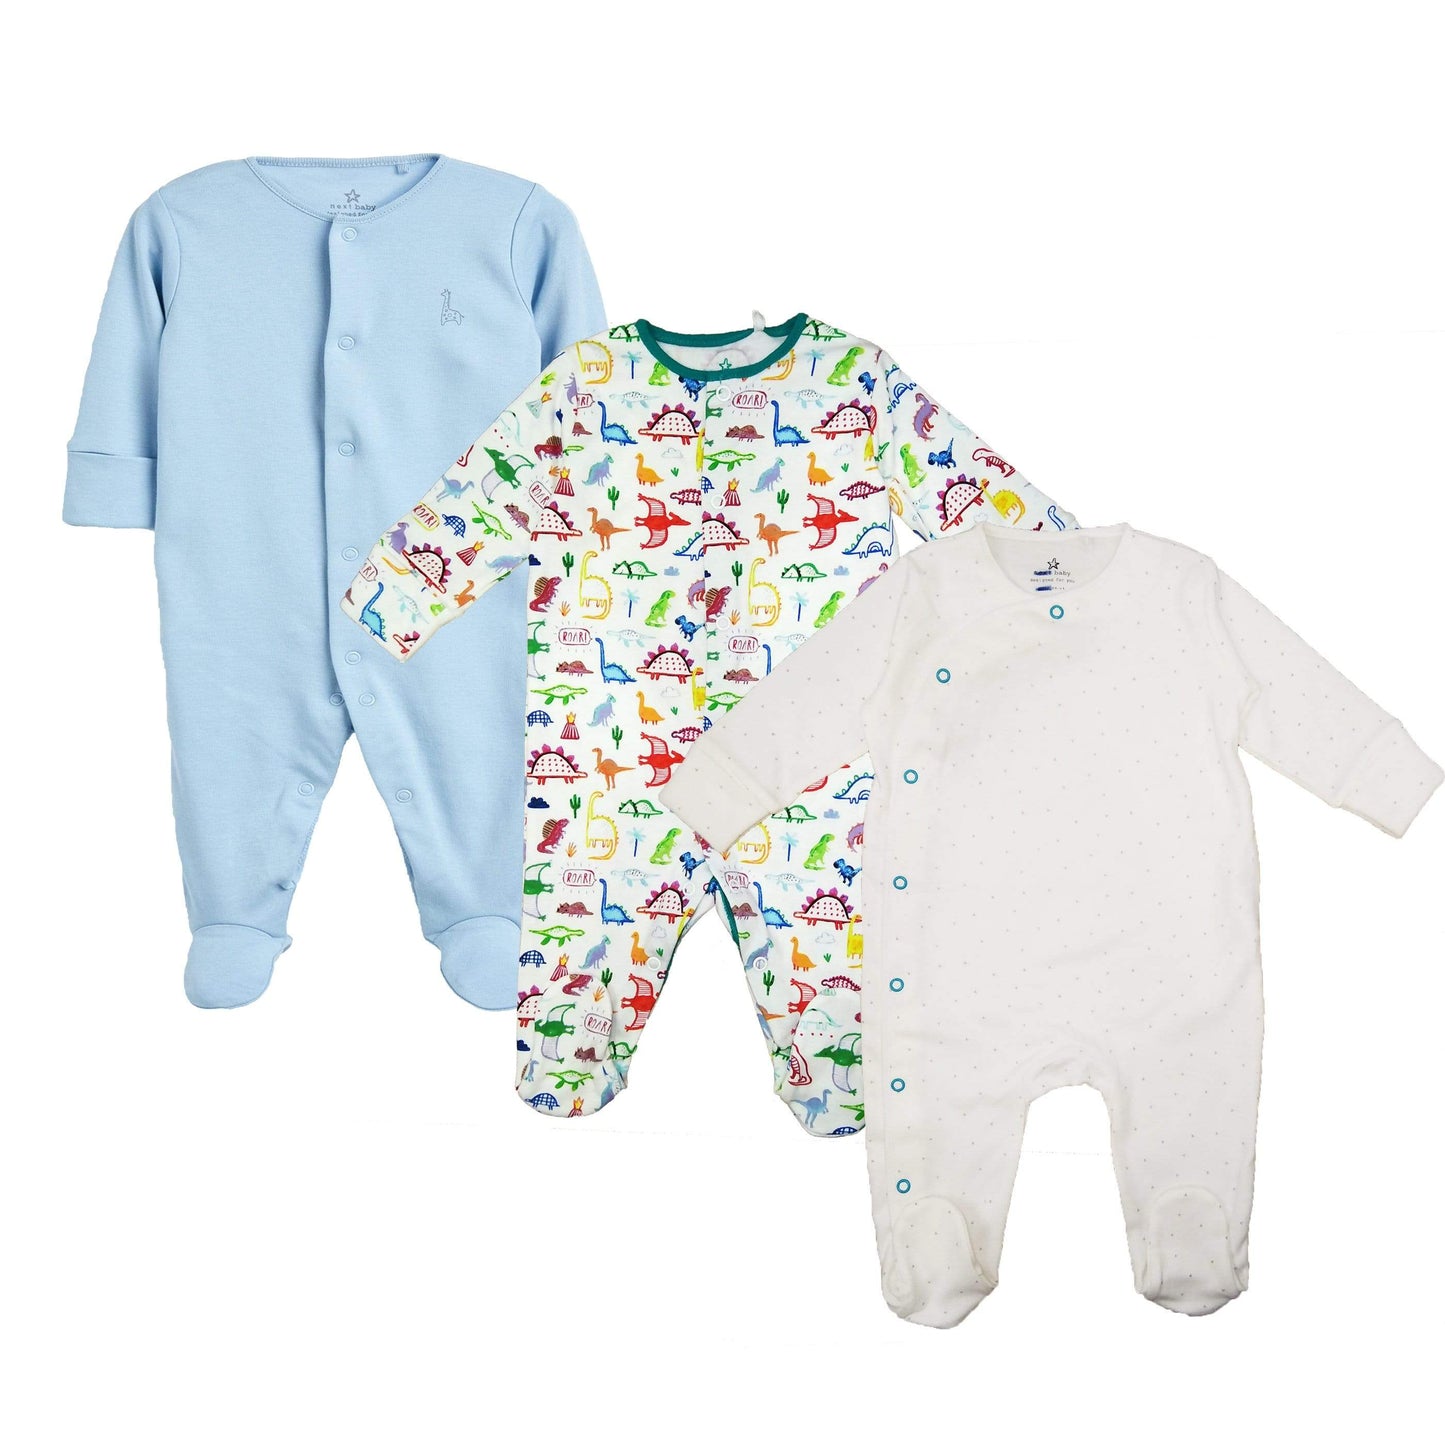 Next Apparel 9-12 month NEXT - Baby Footed Romper Overalls Set